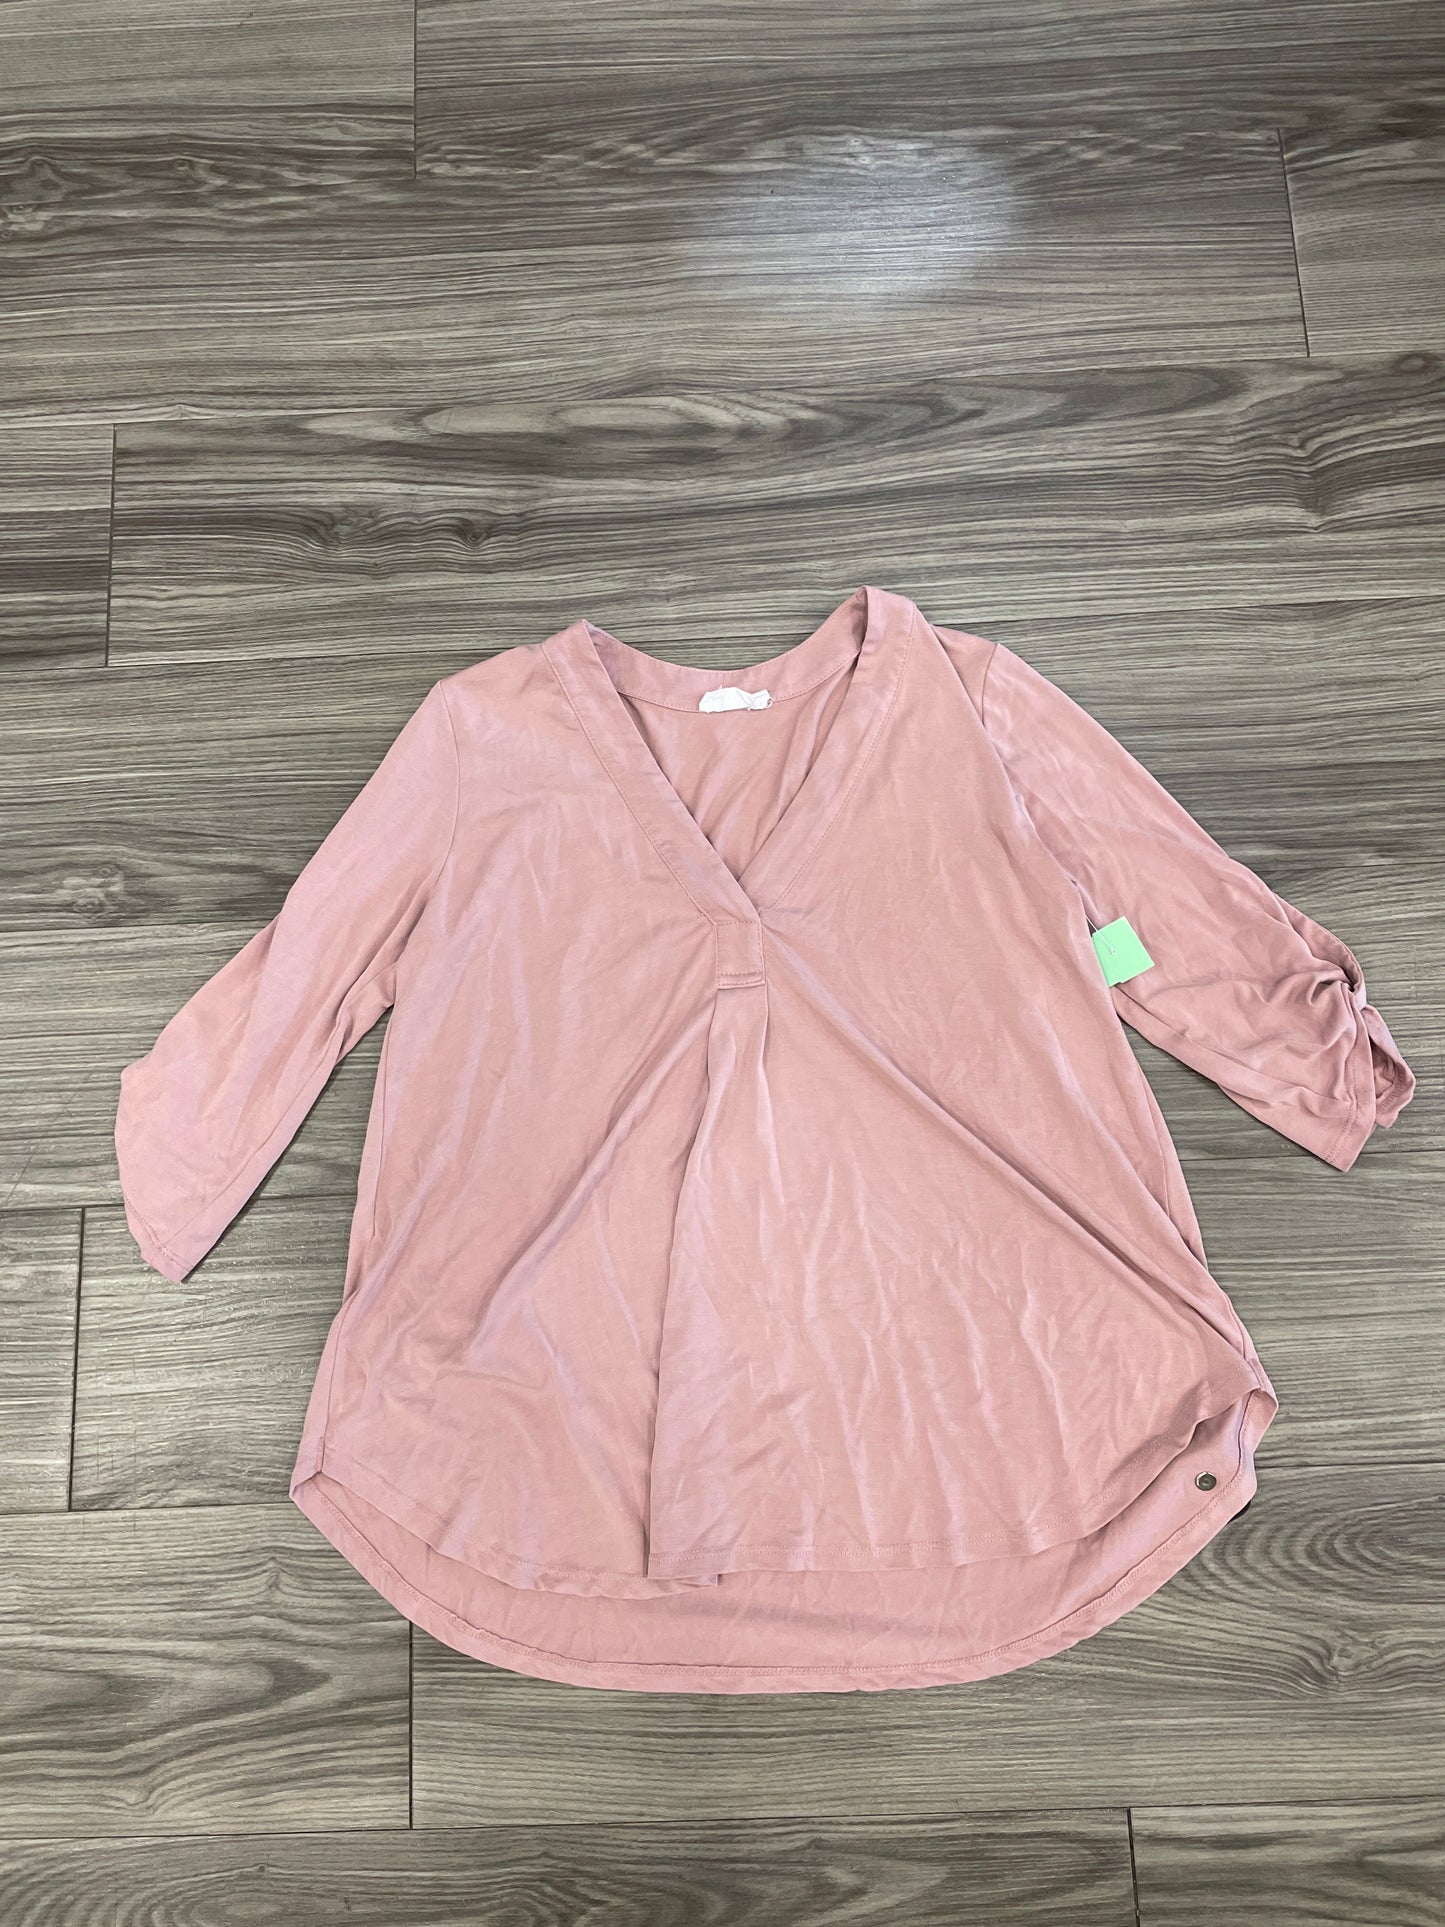 Pink Top Long Sleeve Lush, Size S